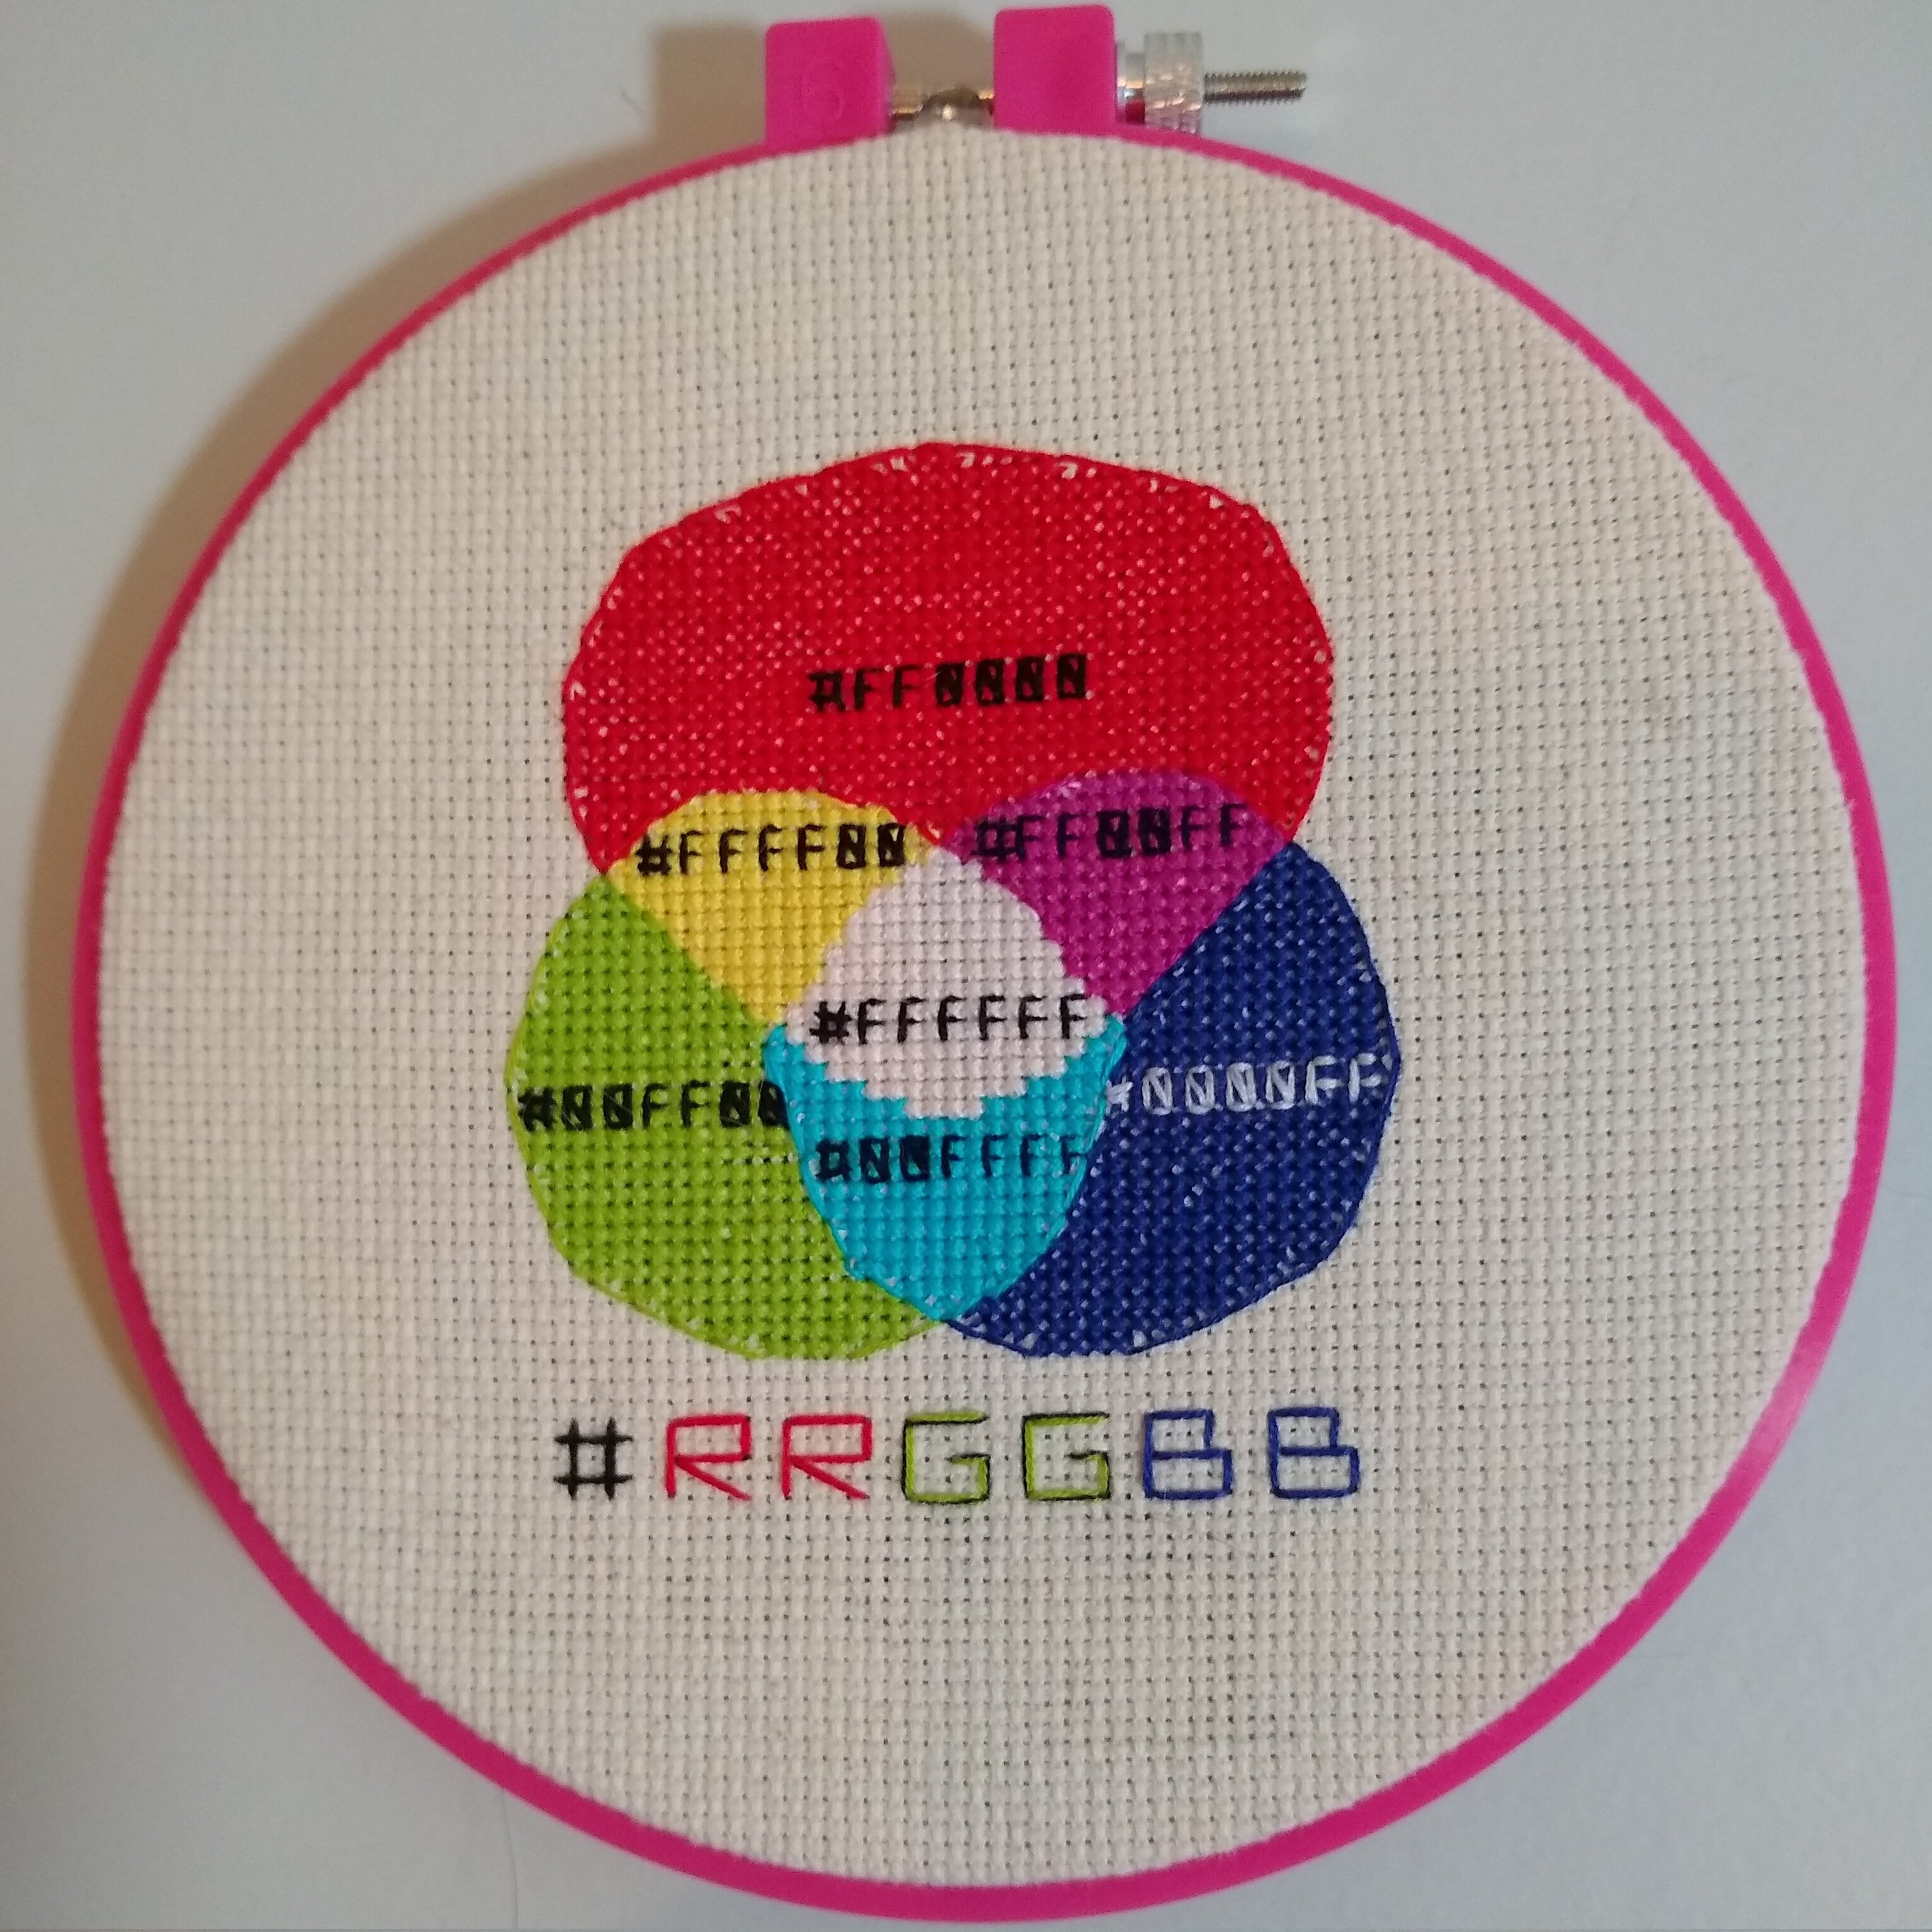 cross-stitch of a diagram of additive colors. The colors are labeled with hexacode values.